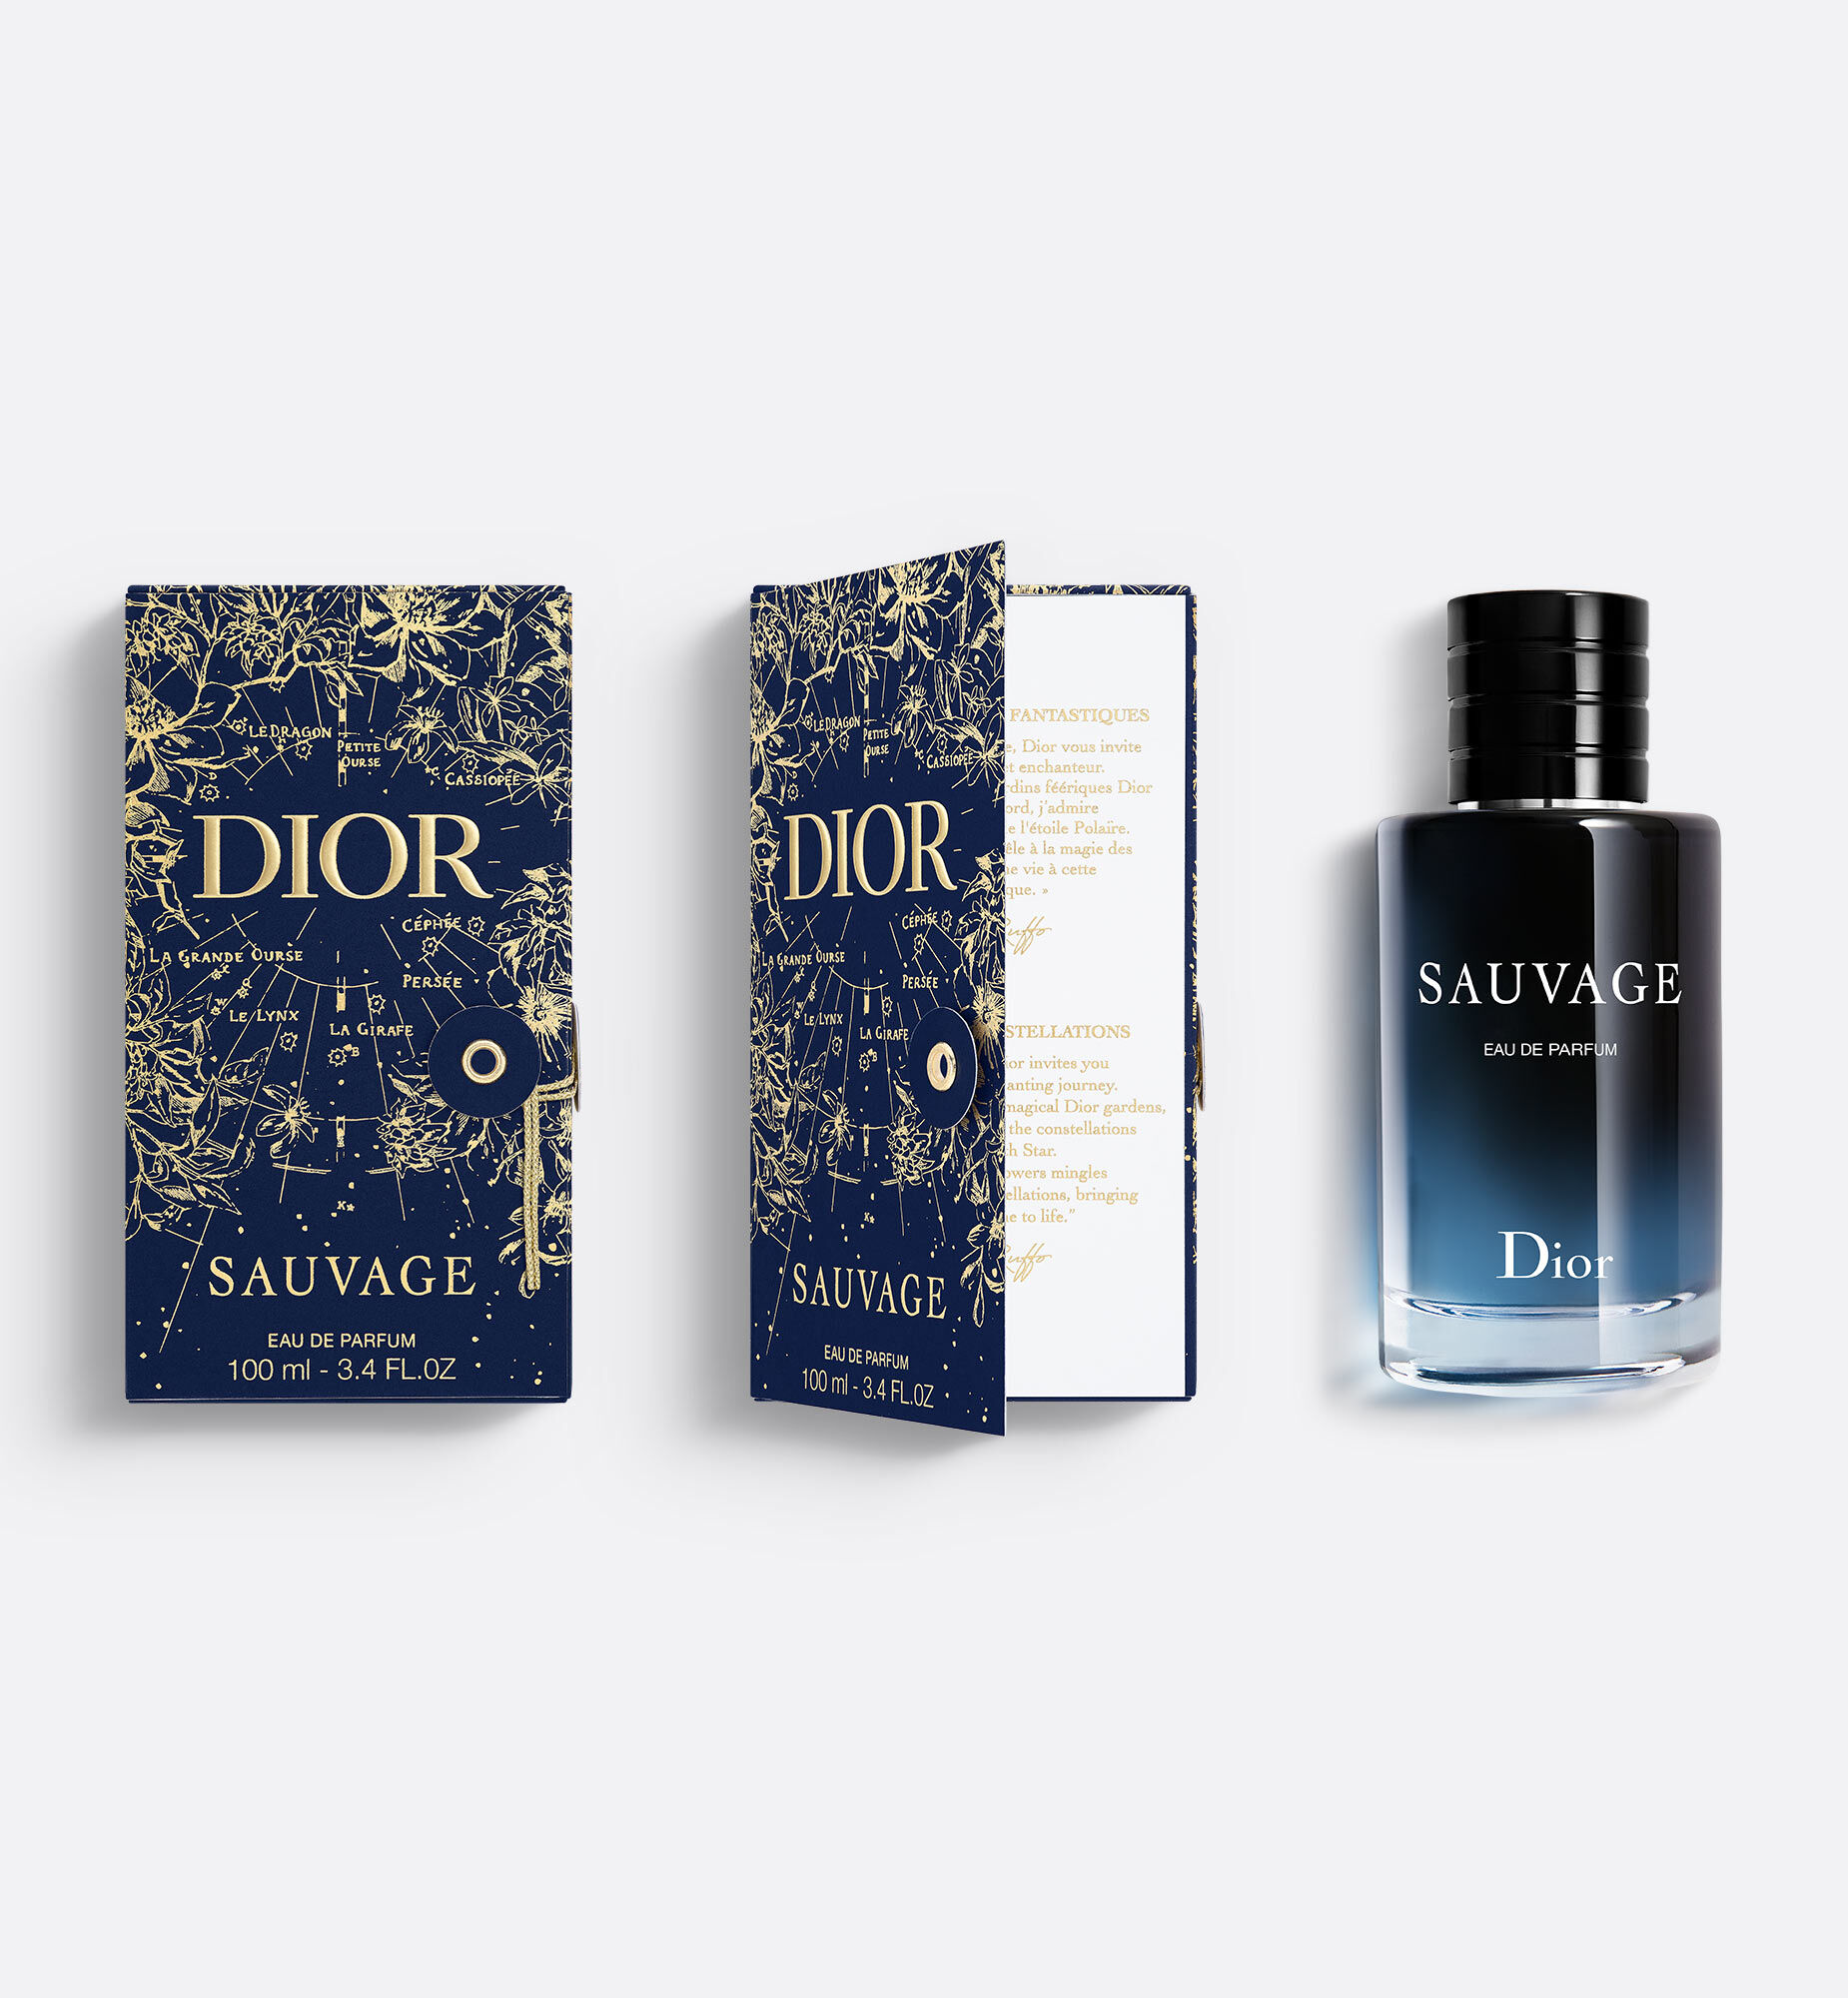 Different Types Of Dior Sauvage Hot Sale  xevietnamcom 1688168681